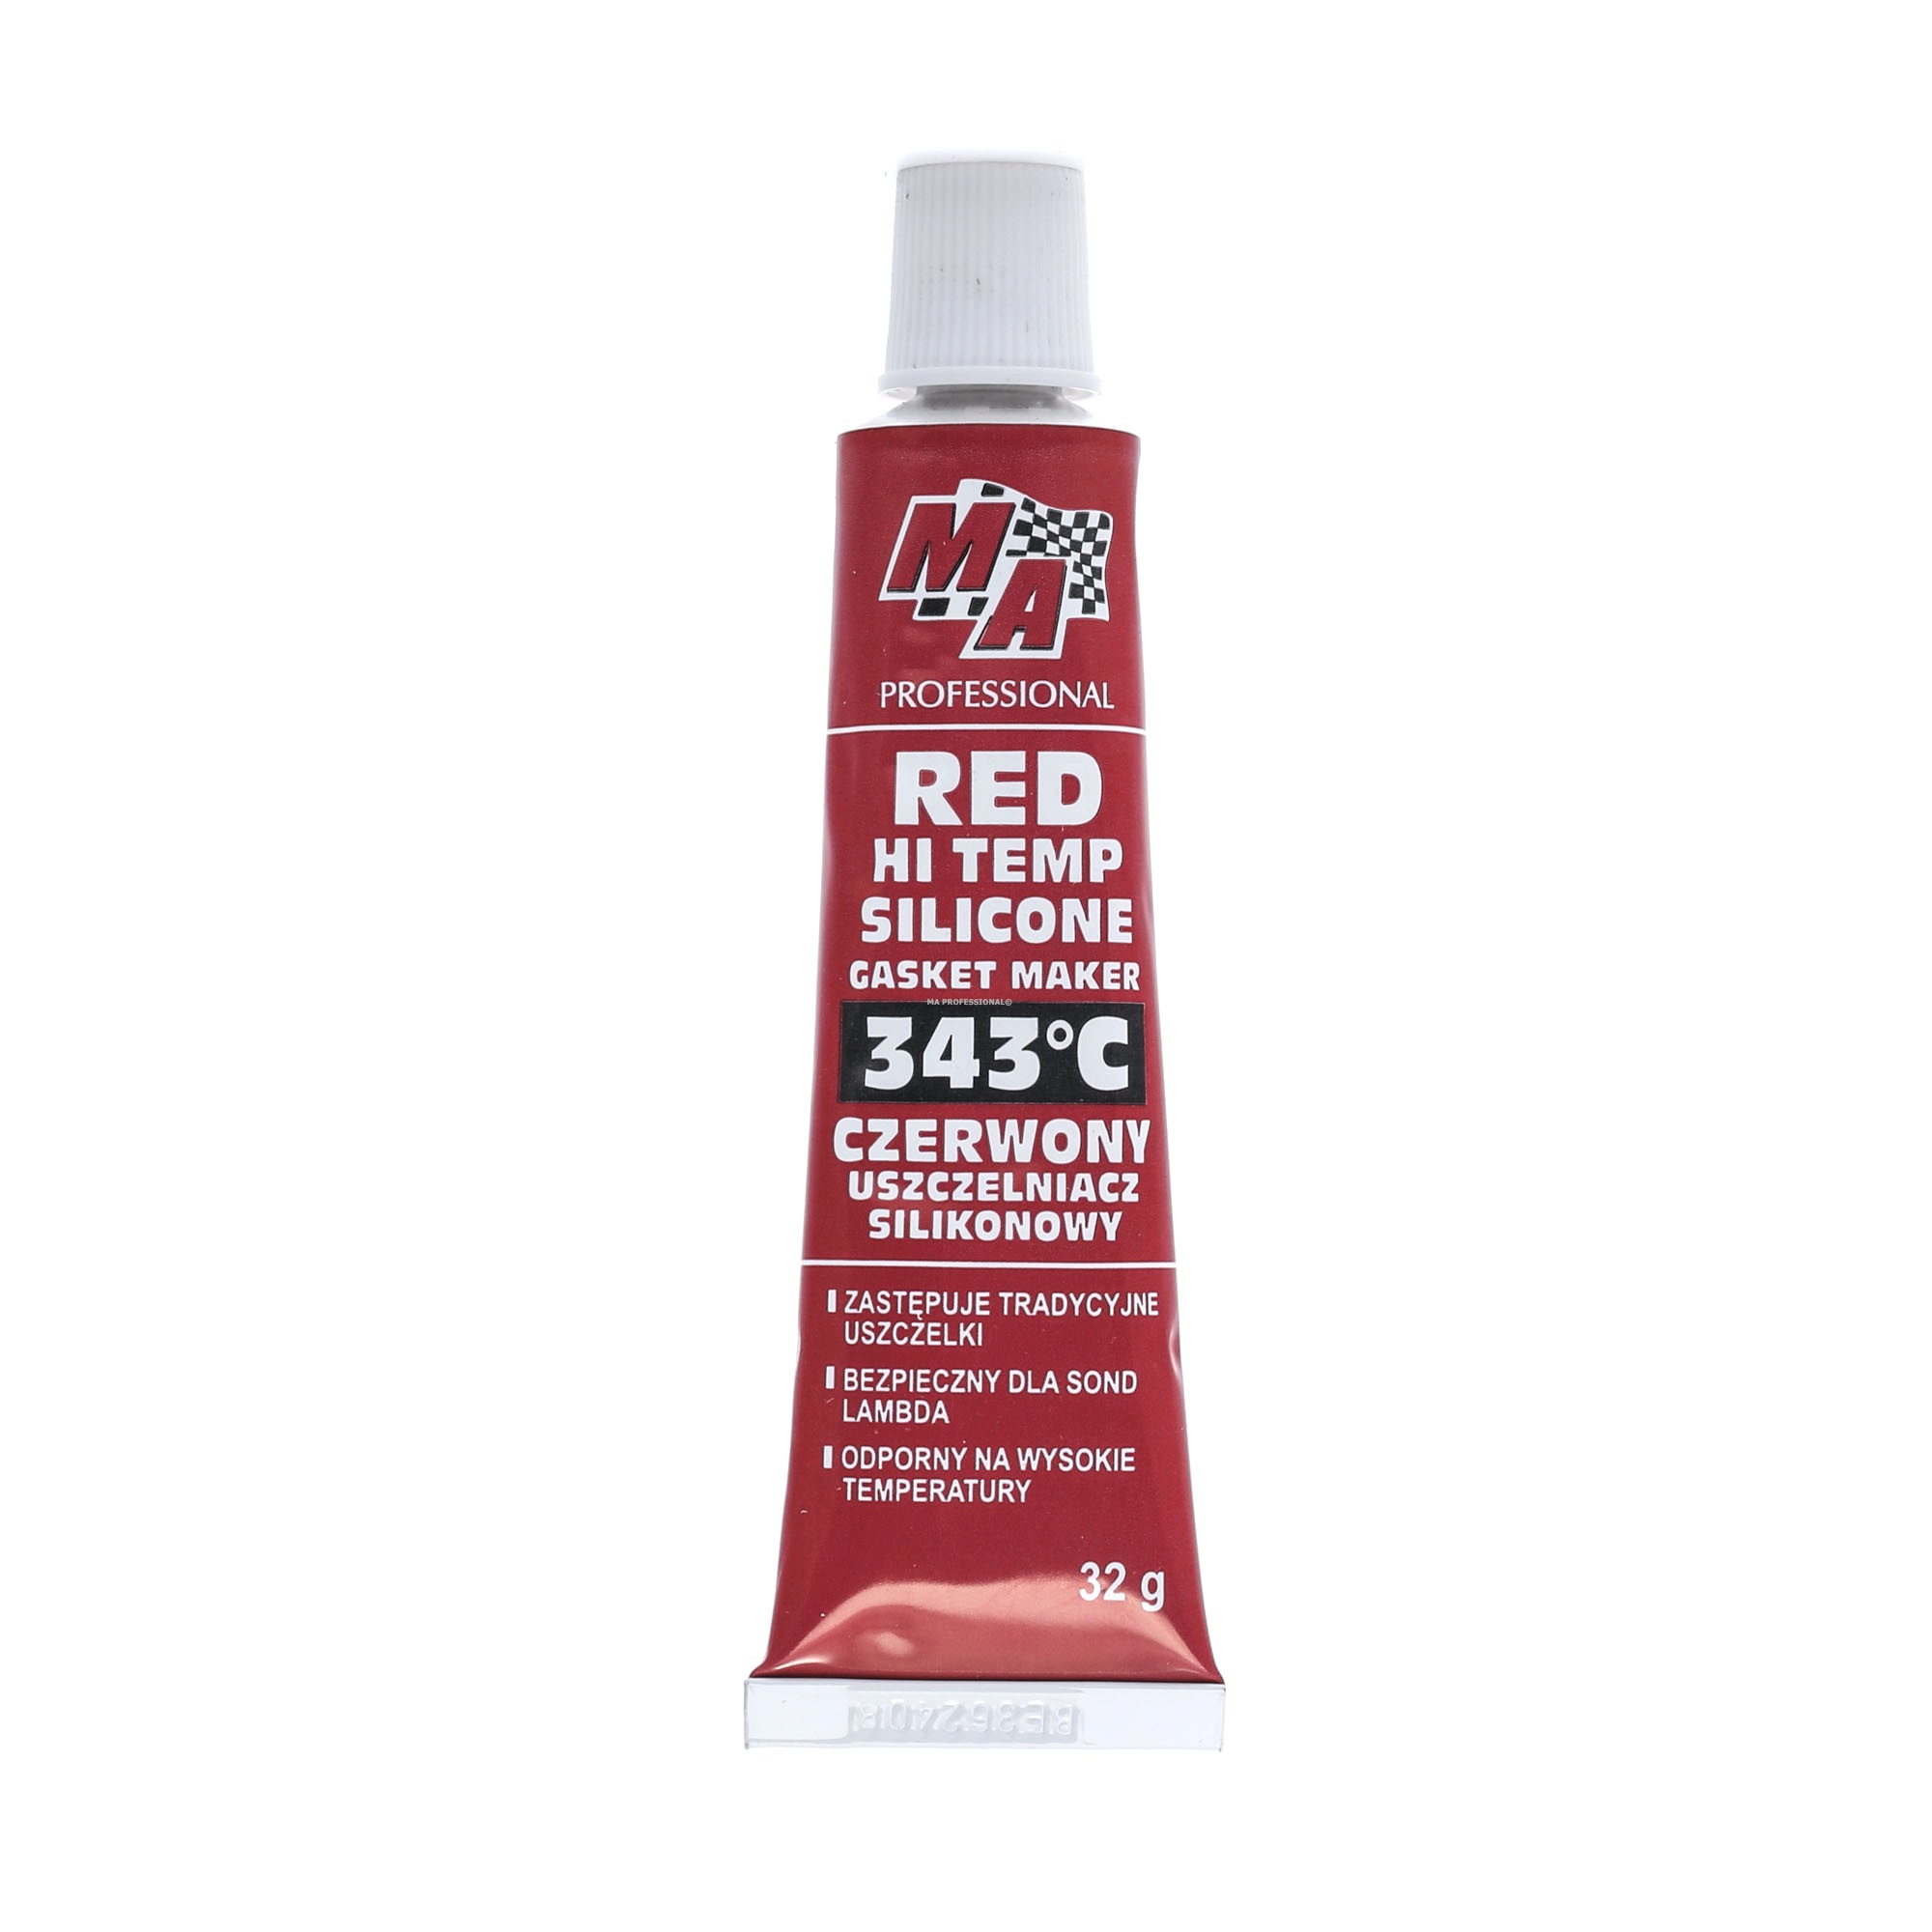 MA PROFESSIONAL 20A17 Engine gasket sealant Tube, Silicone, Capacity: 32ml, Permanently elastic, Oil resistant, red